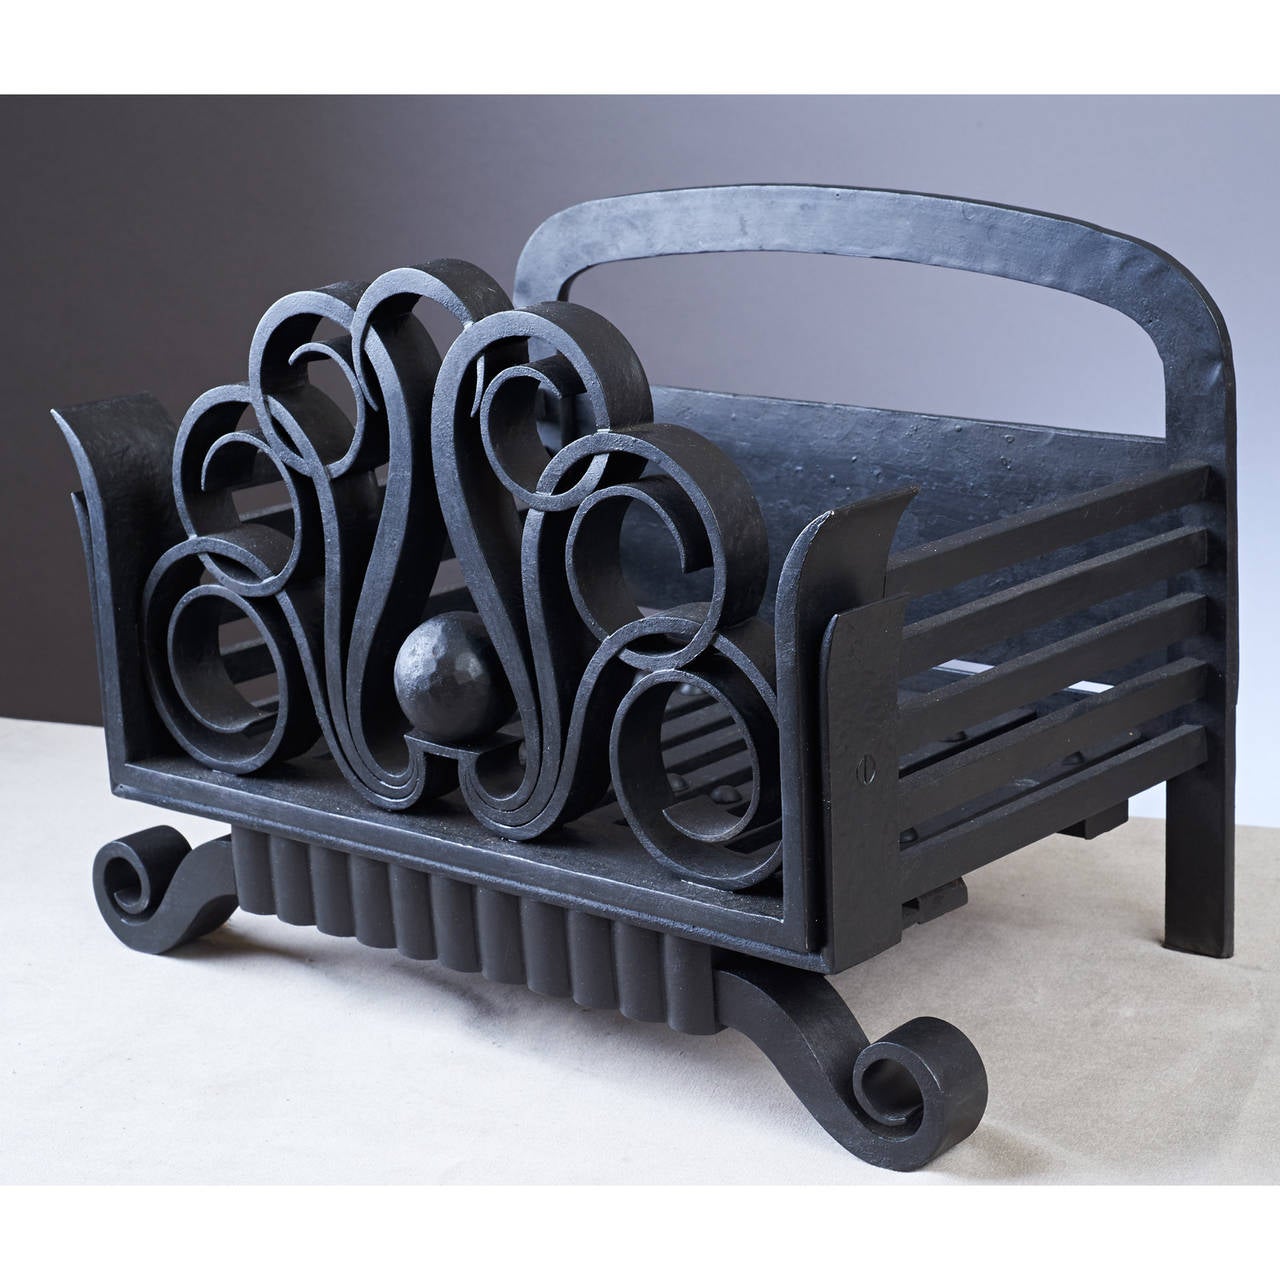 Raymond Subes (1893-1970) in the manner of.

Wrought iron log carrier with scroll motifs,
France, 1930s.
Measures: 18 W x 11 D x 12 H.